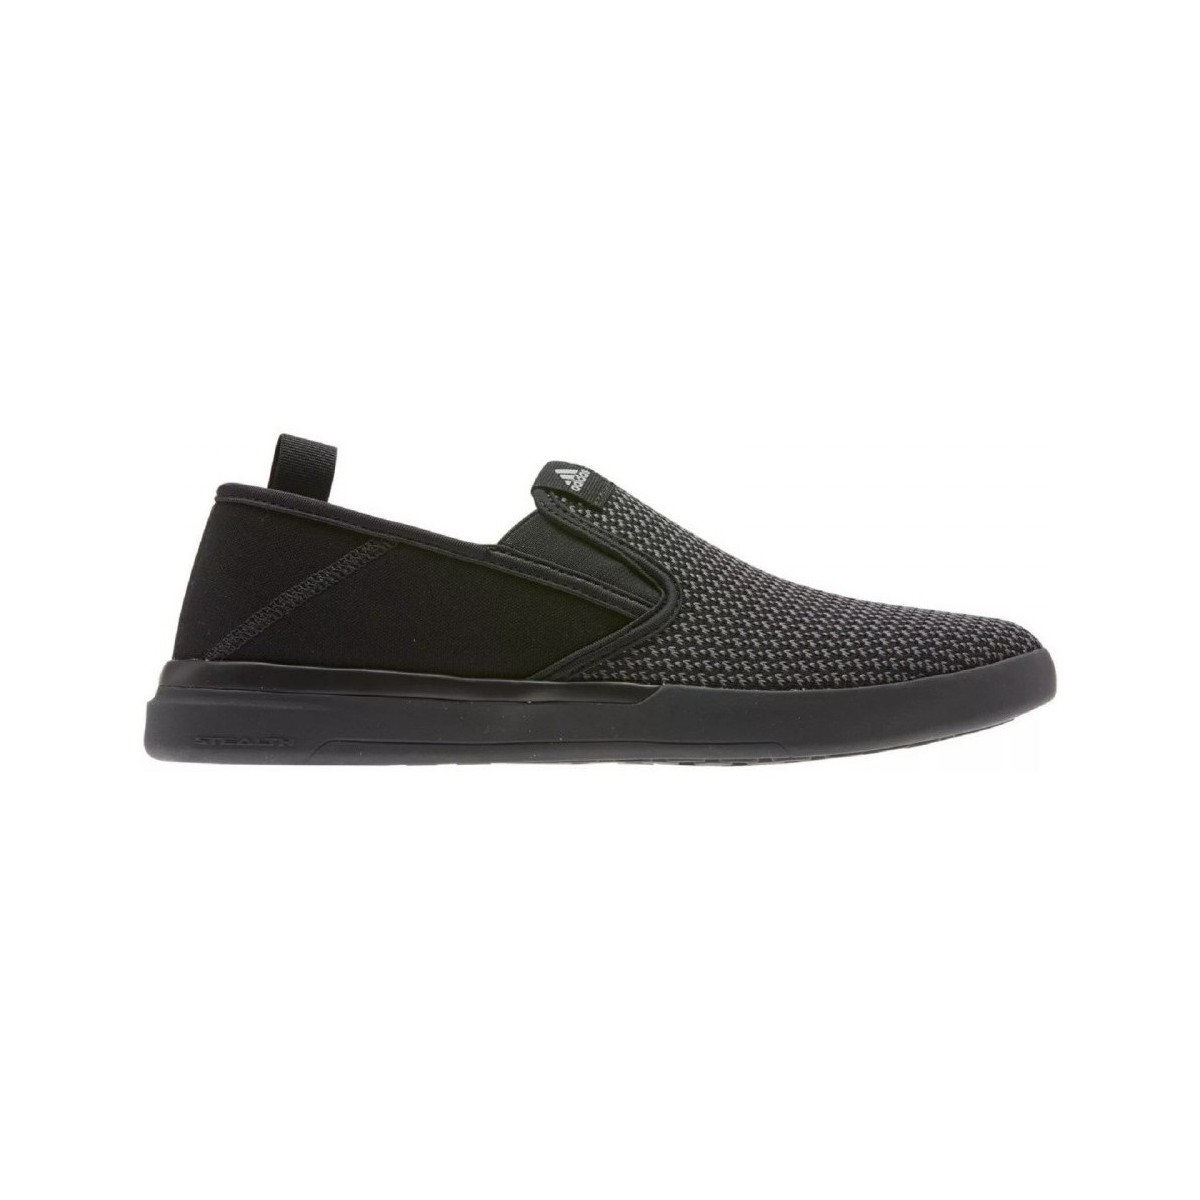 Chaussures Homme Cyclisme adidas Originals Sleuth Slip On Noir